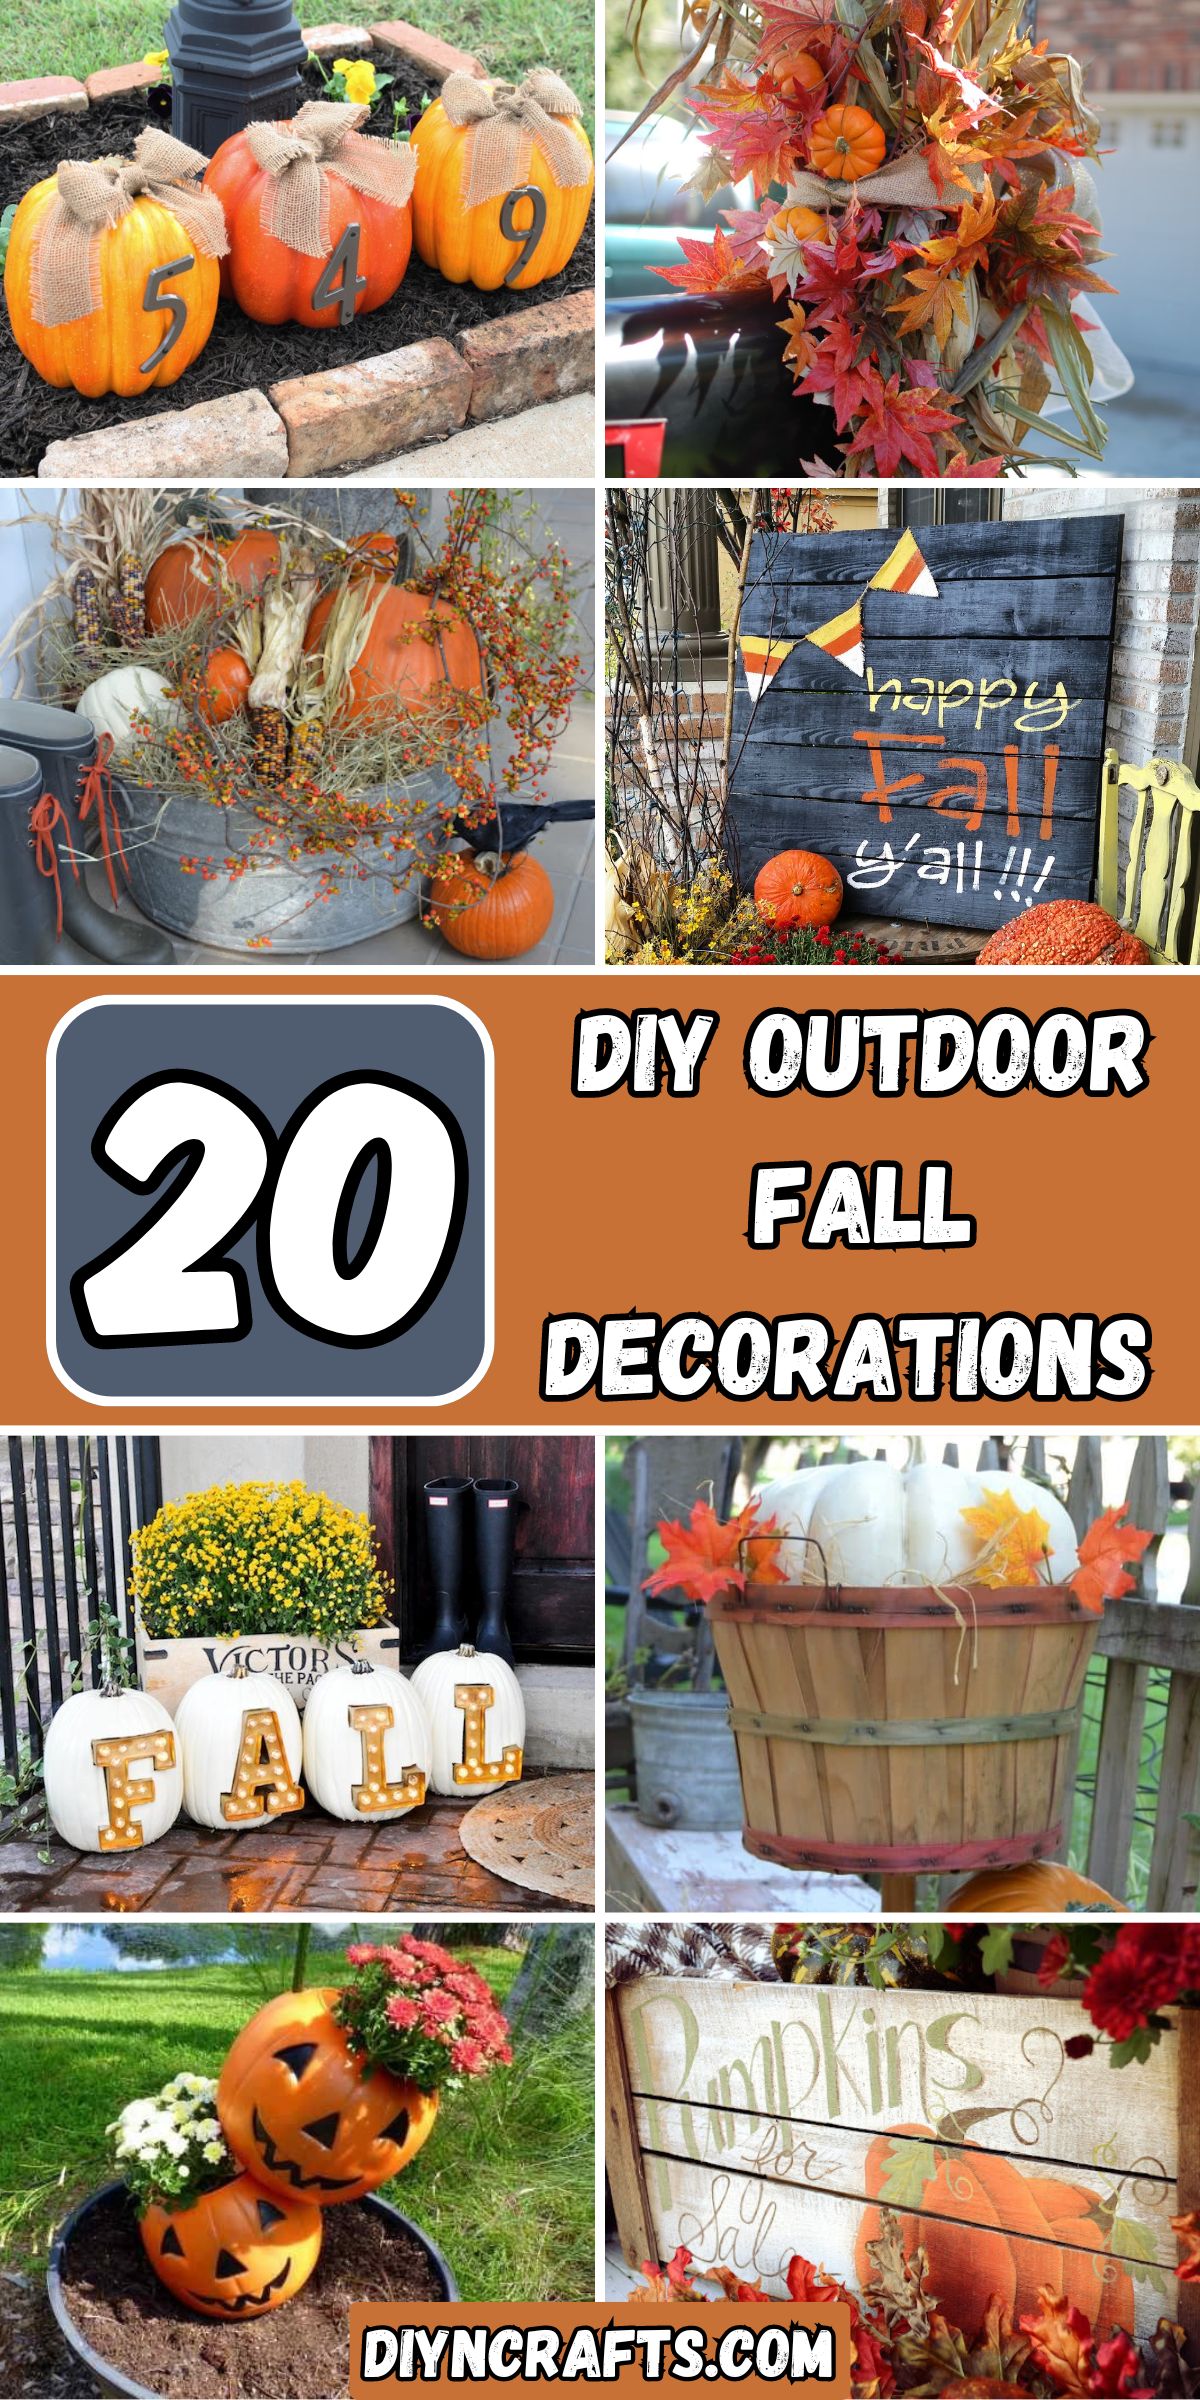 20 DIY Outdoor Fall Decorations That'll Beautify Your Lawn And Garden collage.